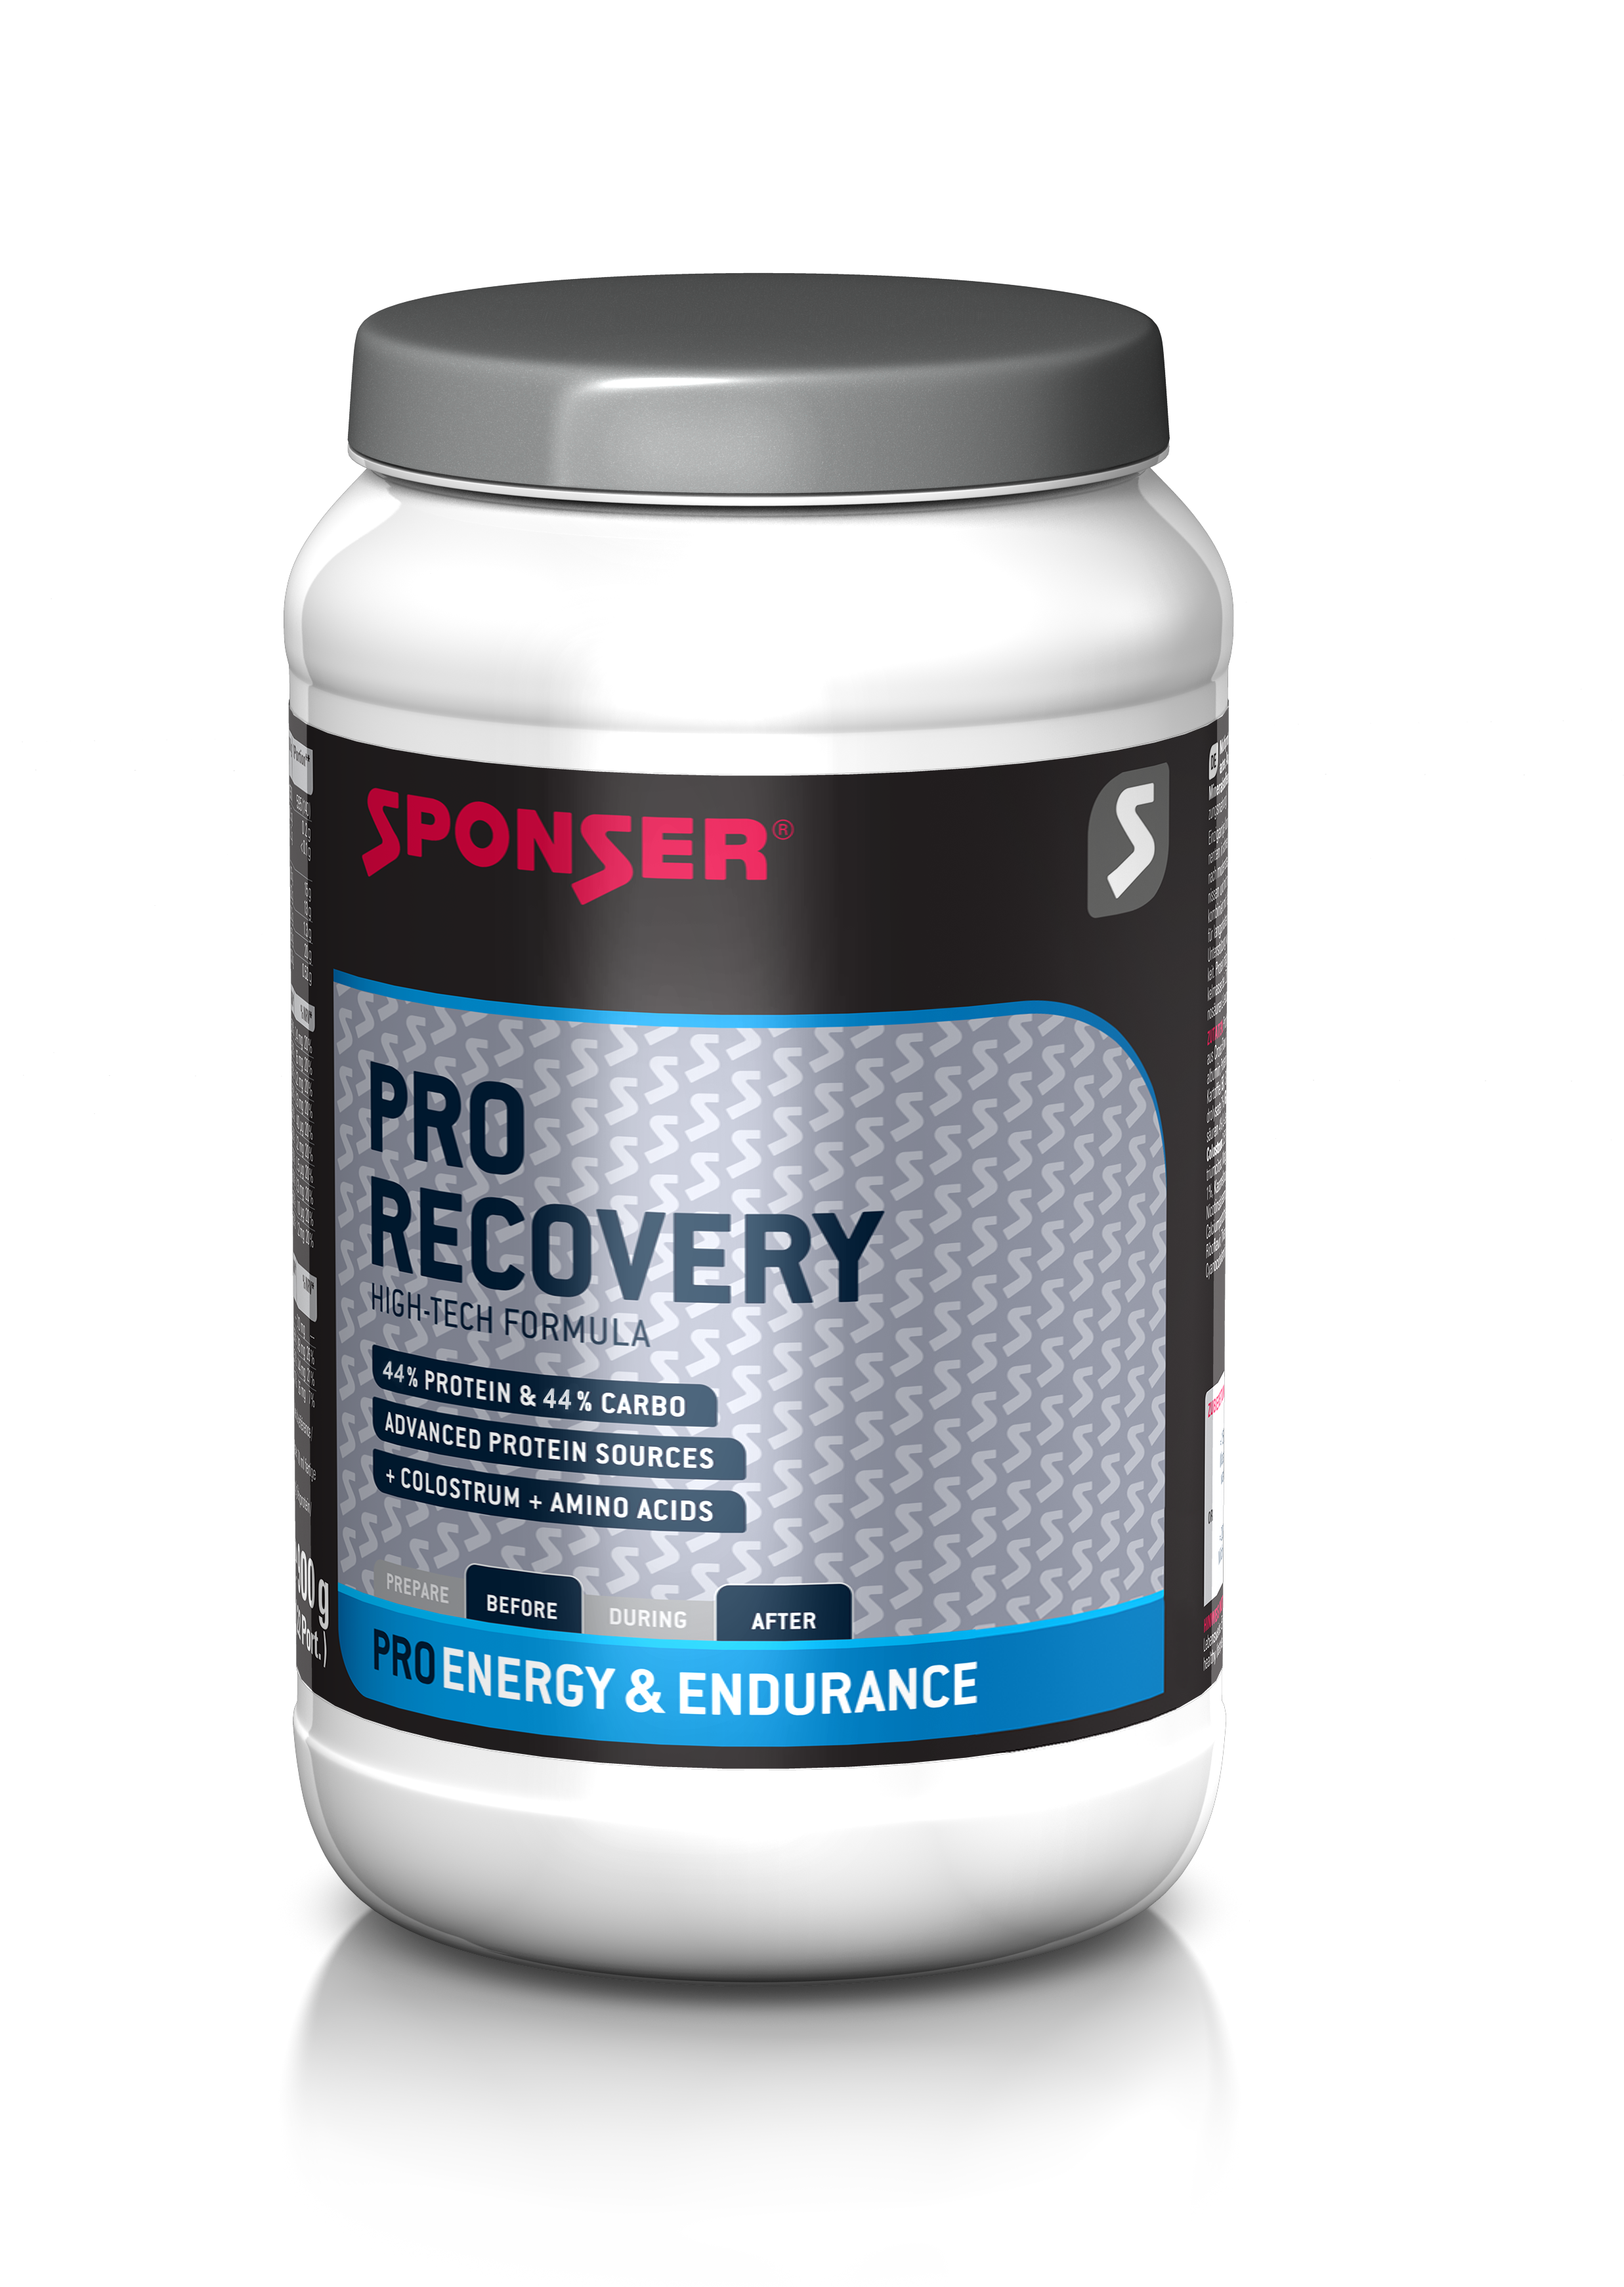 Sponser Power 44/44 Pro Recovery Chocolate